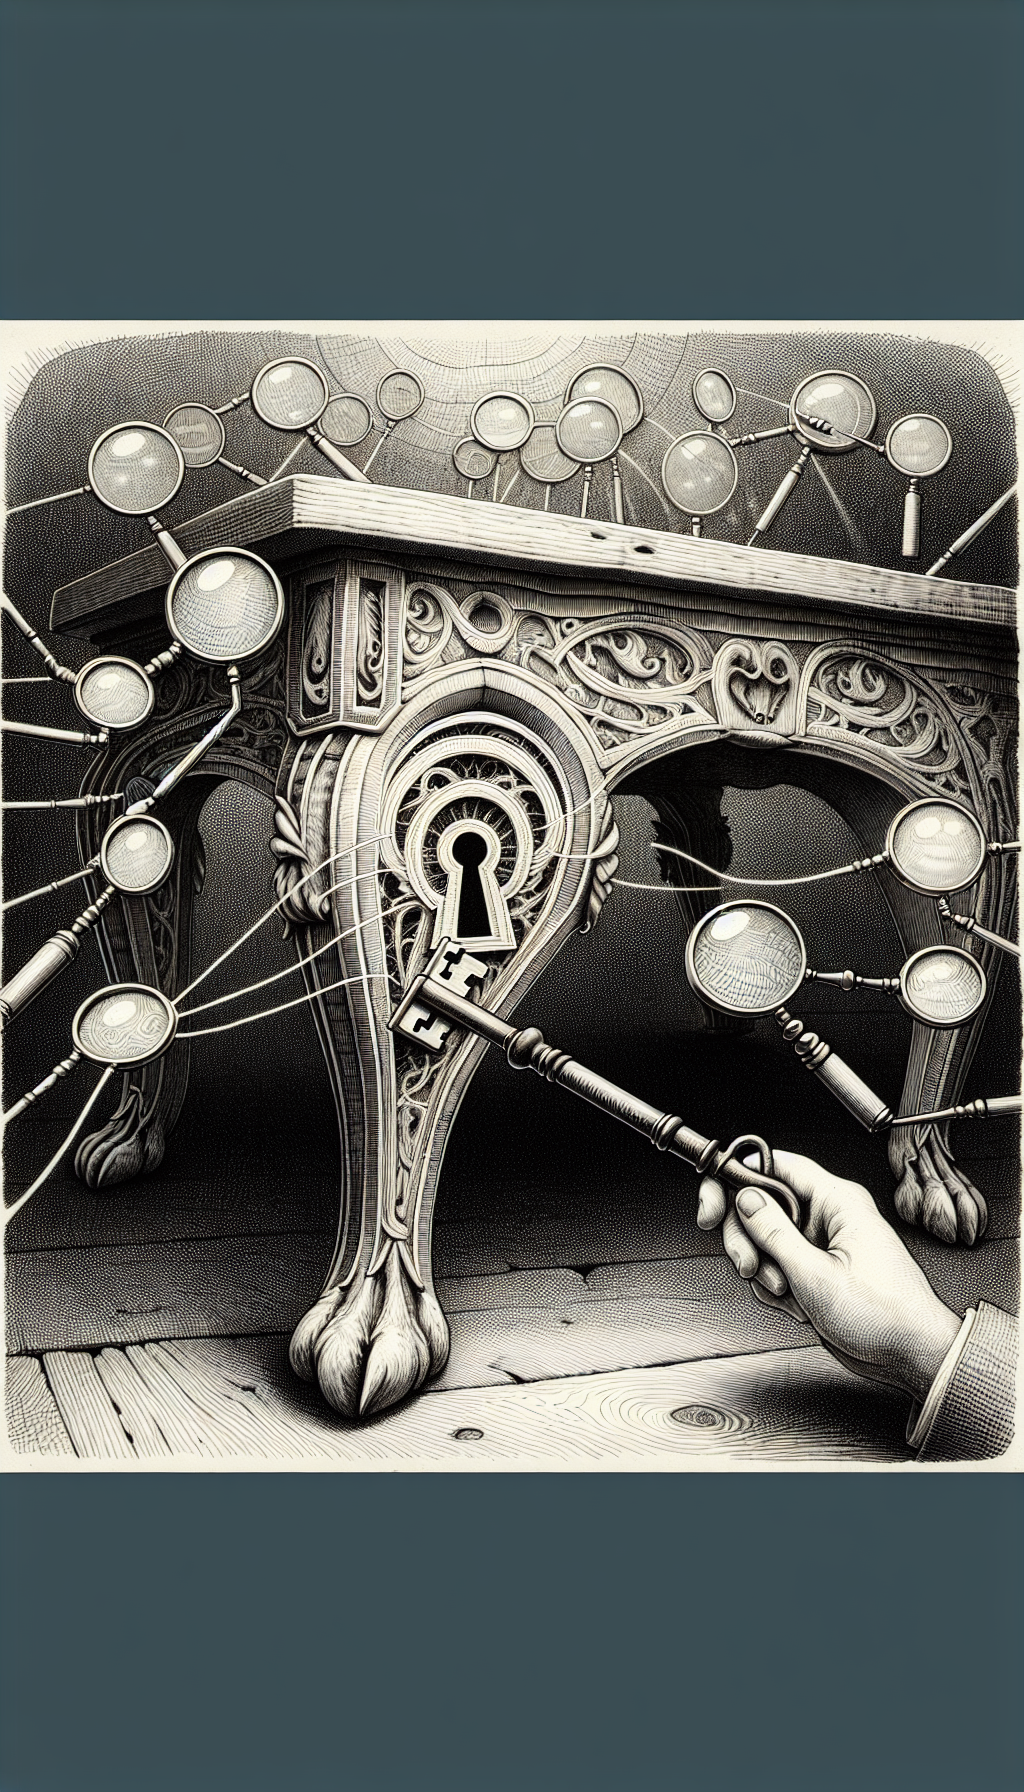 An intricately drawn vintage key is inserted into a whimsical, ornate table leg keyhole, with mystical lines emanating from it, symbolizing the unlocking of knowledge. Above the table hover magnifying glasses focusing on distinctive features like claw feet, dovetail joints, and wood patina, each highlighting different identification clues, rendered in styles varying from detailed cross-hatching to bold art deco lines.